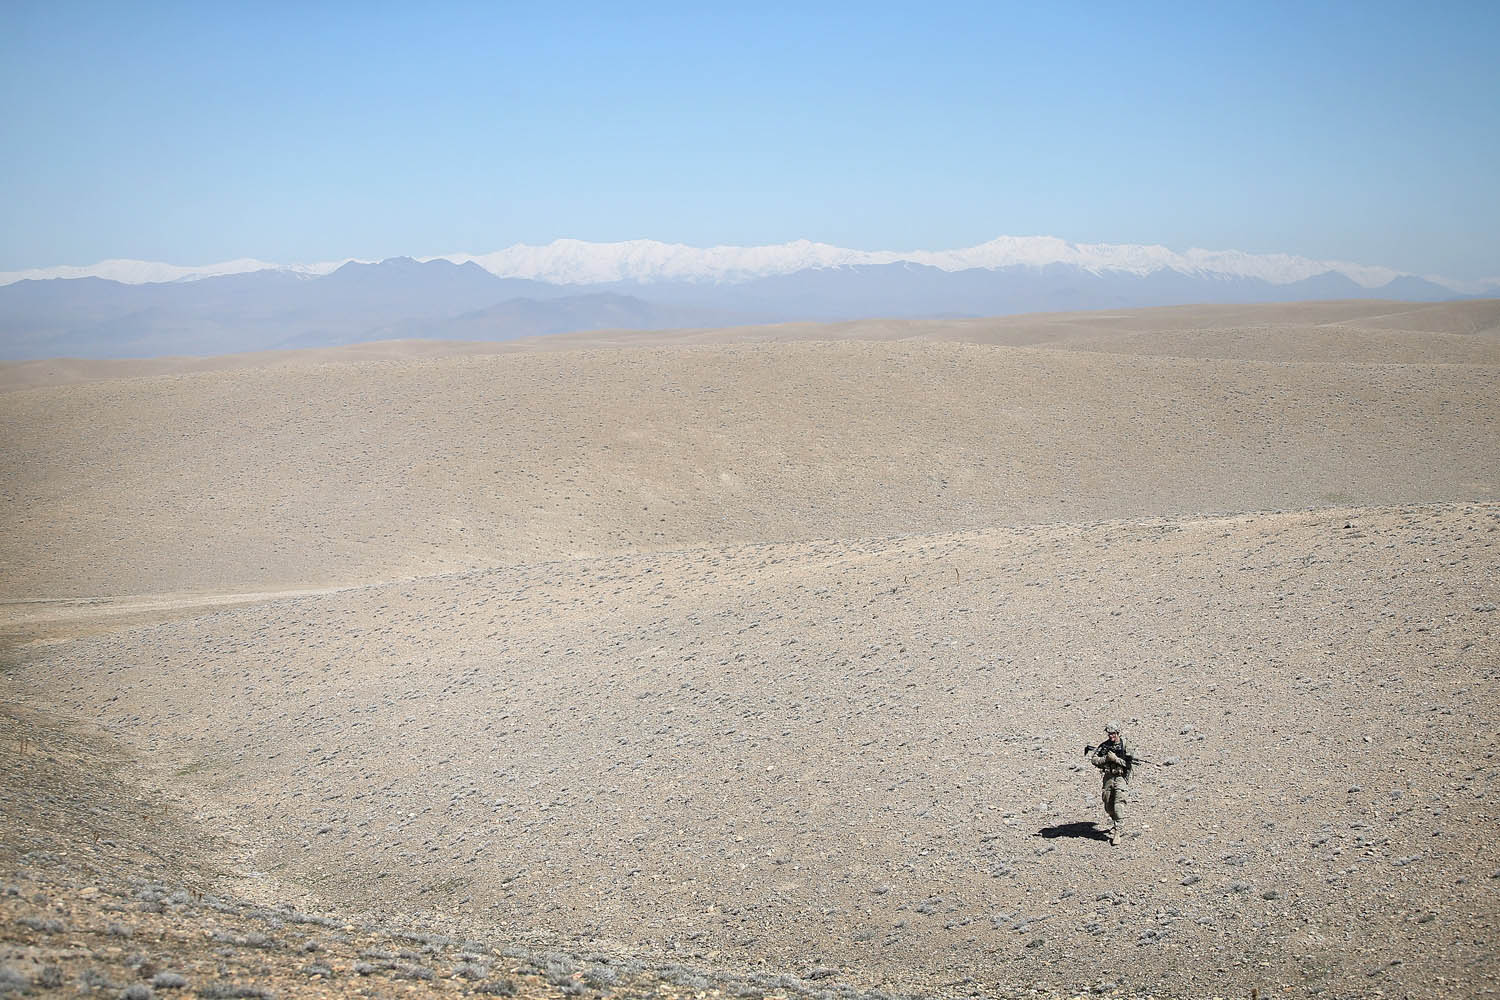 Mar. 30, 2014.  SGT Martyn Piggott from Pittstown, New Jersey with the U.S. Army's 2nd Battalion 87th Infantry Regiment, 3rd Brigade Combat Team, 10th Mountain Division patrols across barren foothills looking for positions the enemy has used to send rockets onto the FOB near Pul-e Alam, Afghanistan.